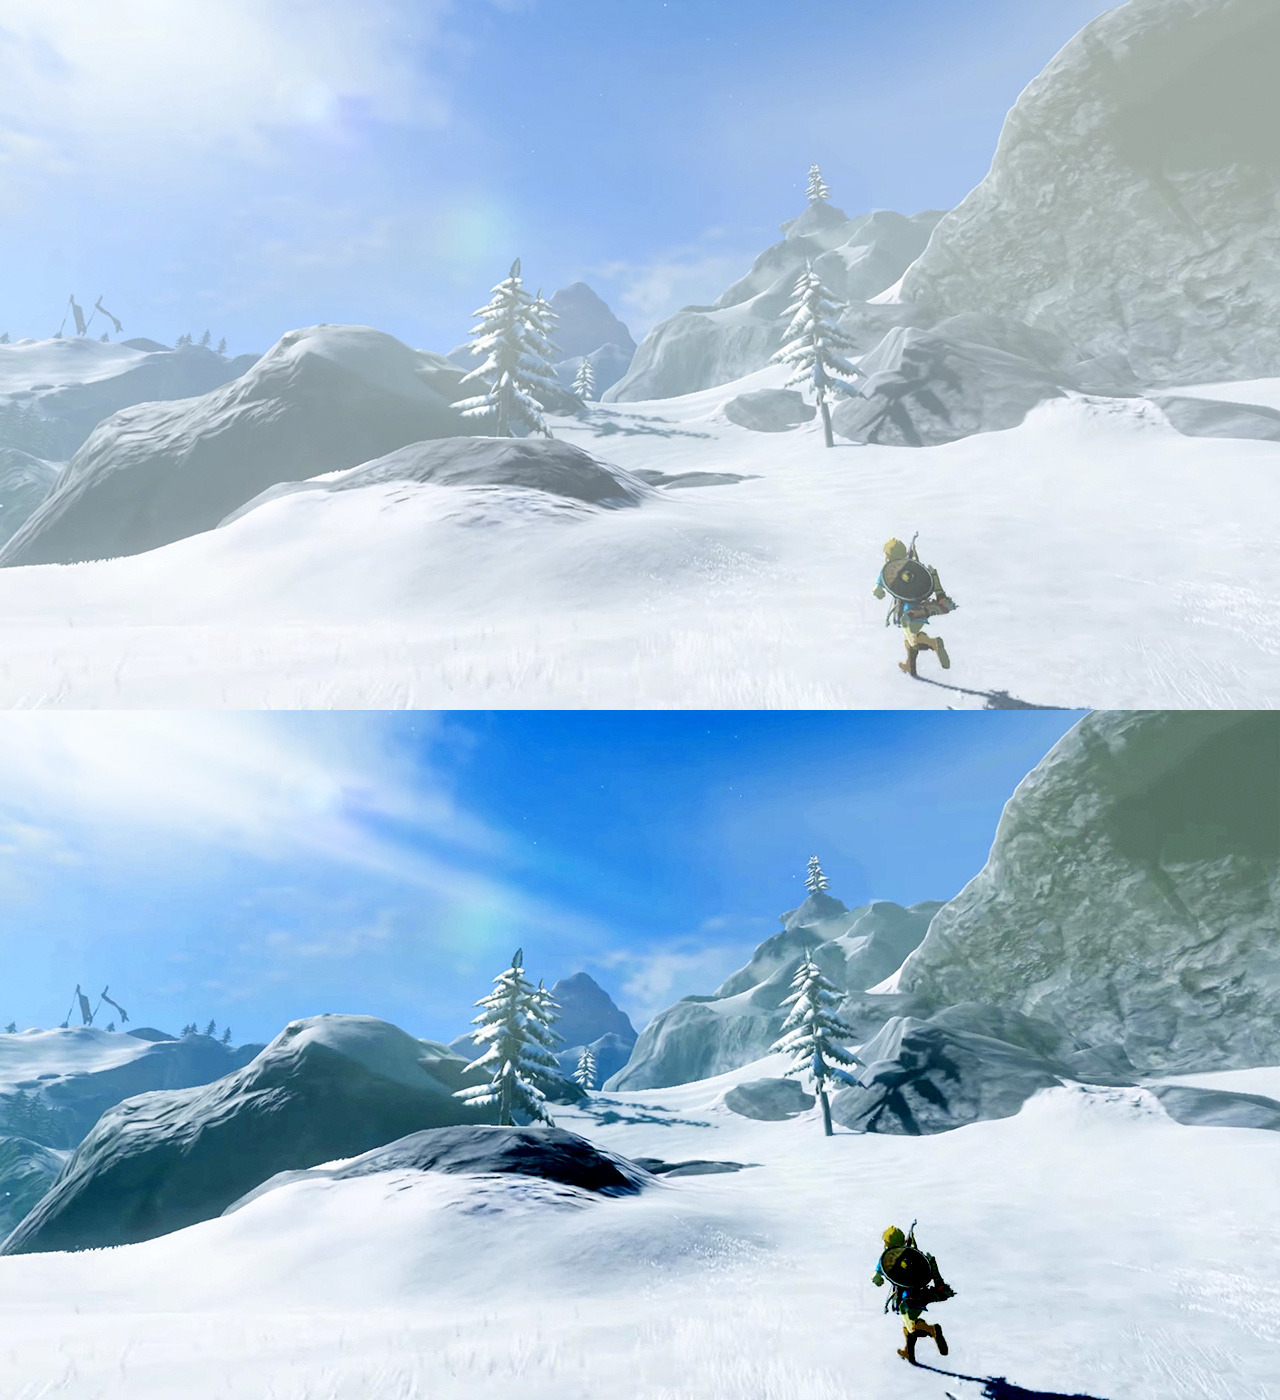 The new Zelda game looks incredible, really.But there’s this fog-thing that somewhat